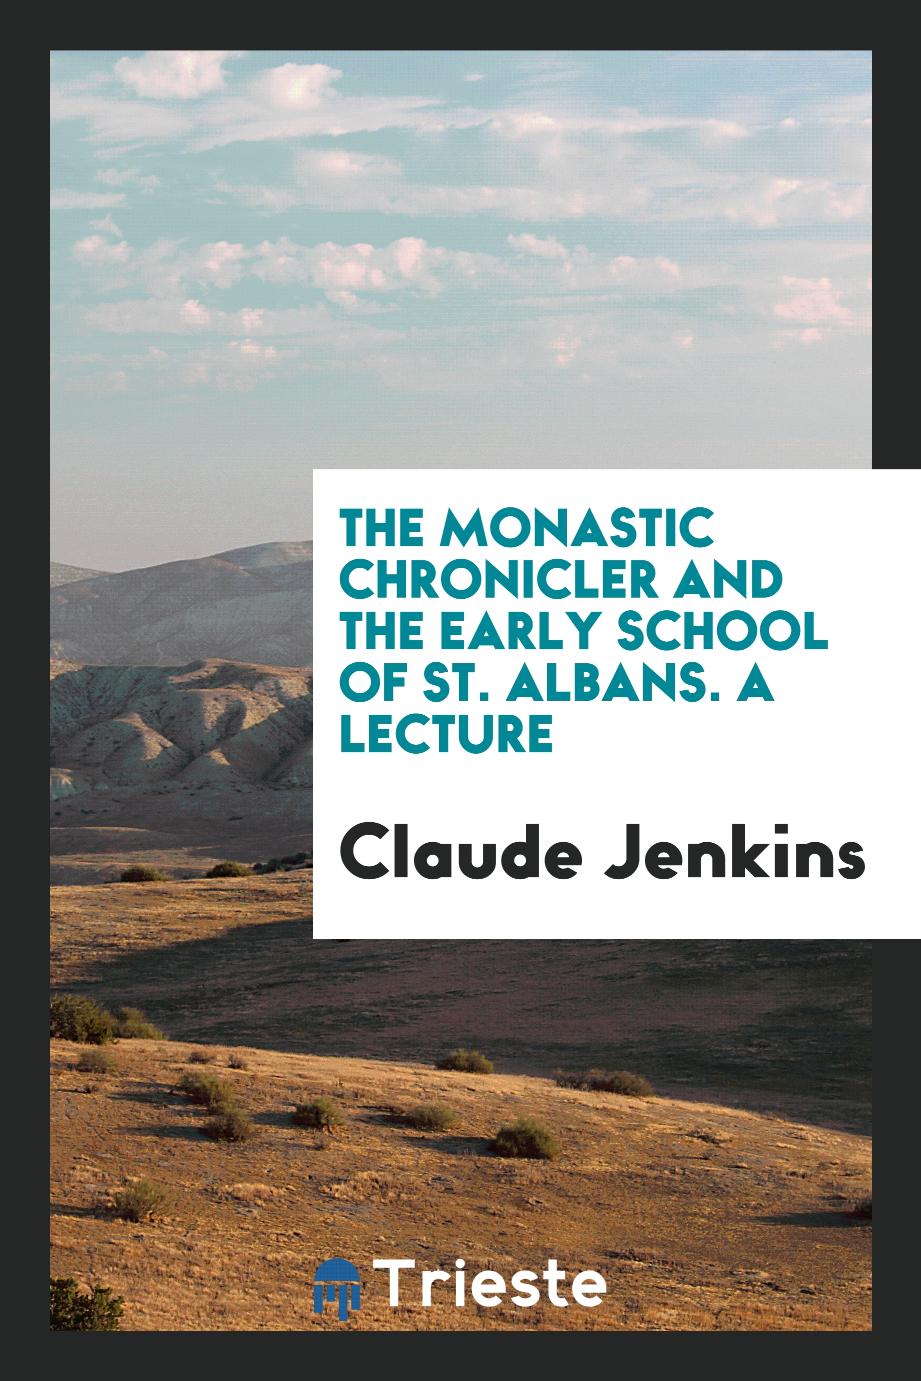 The Monastic Chronicler and the Early School of St. Albans. A Lecture